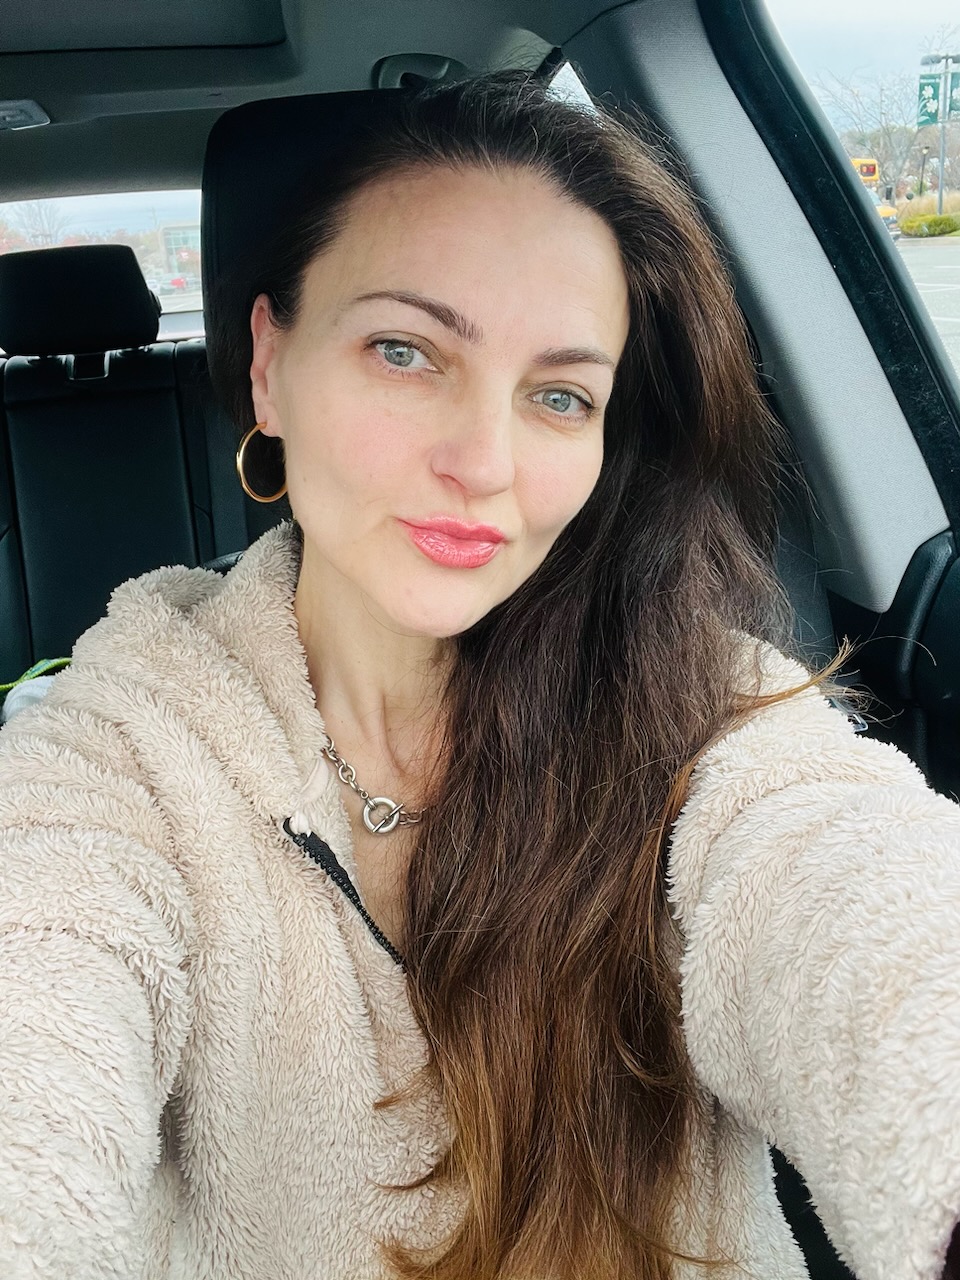 A woman with long brown hair takes a selfie while sitting in a car